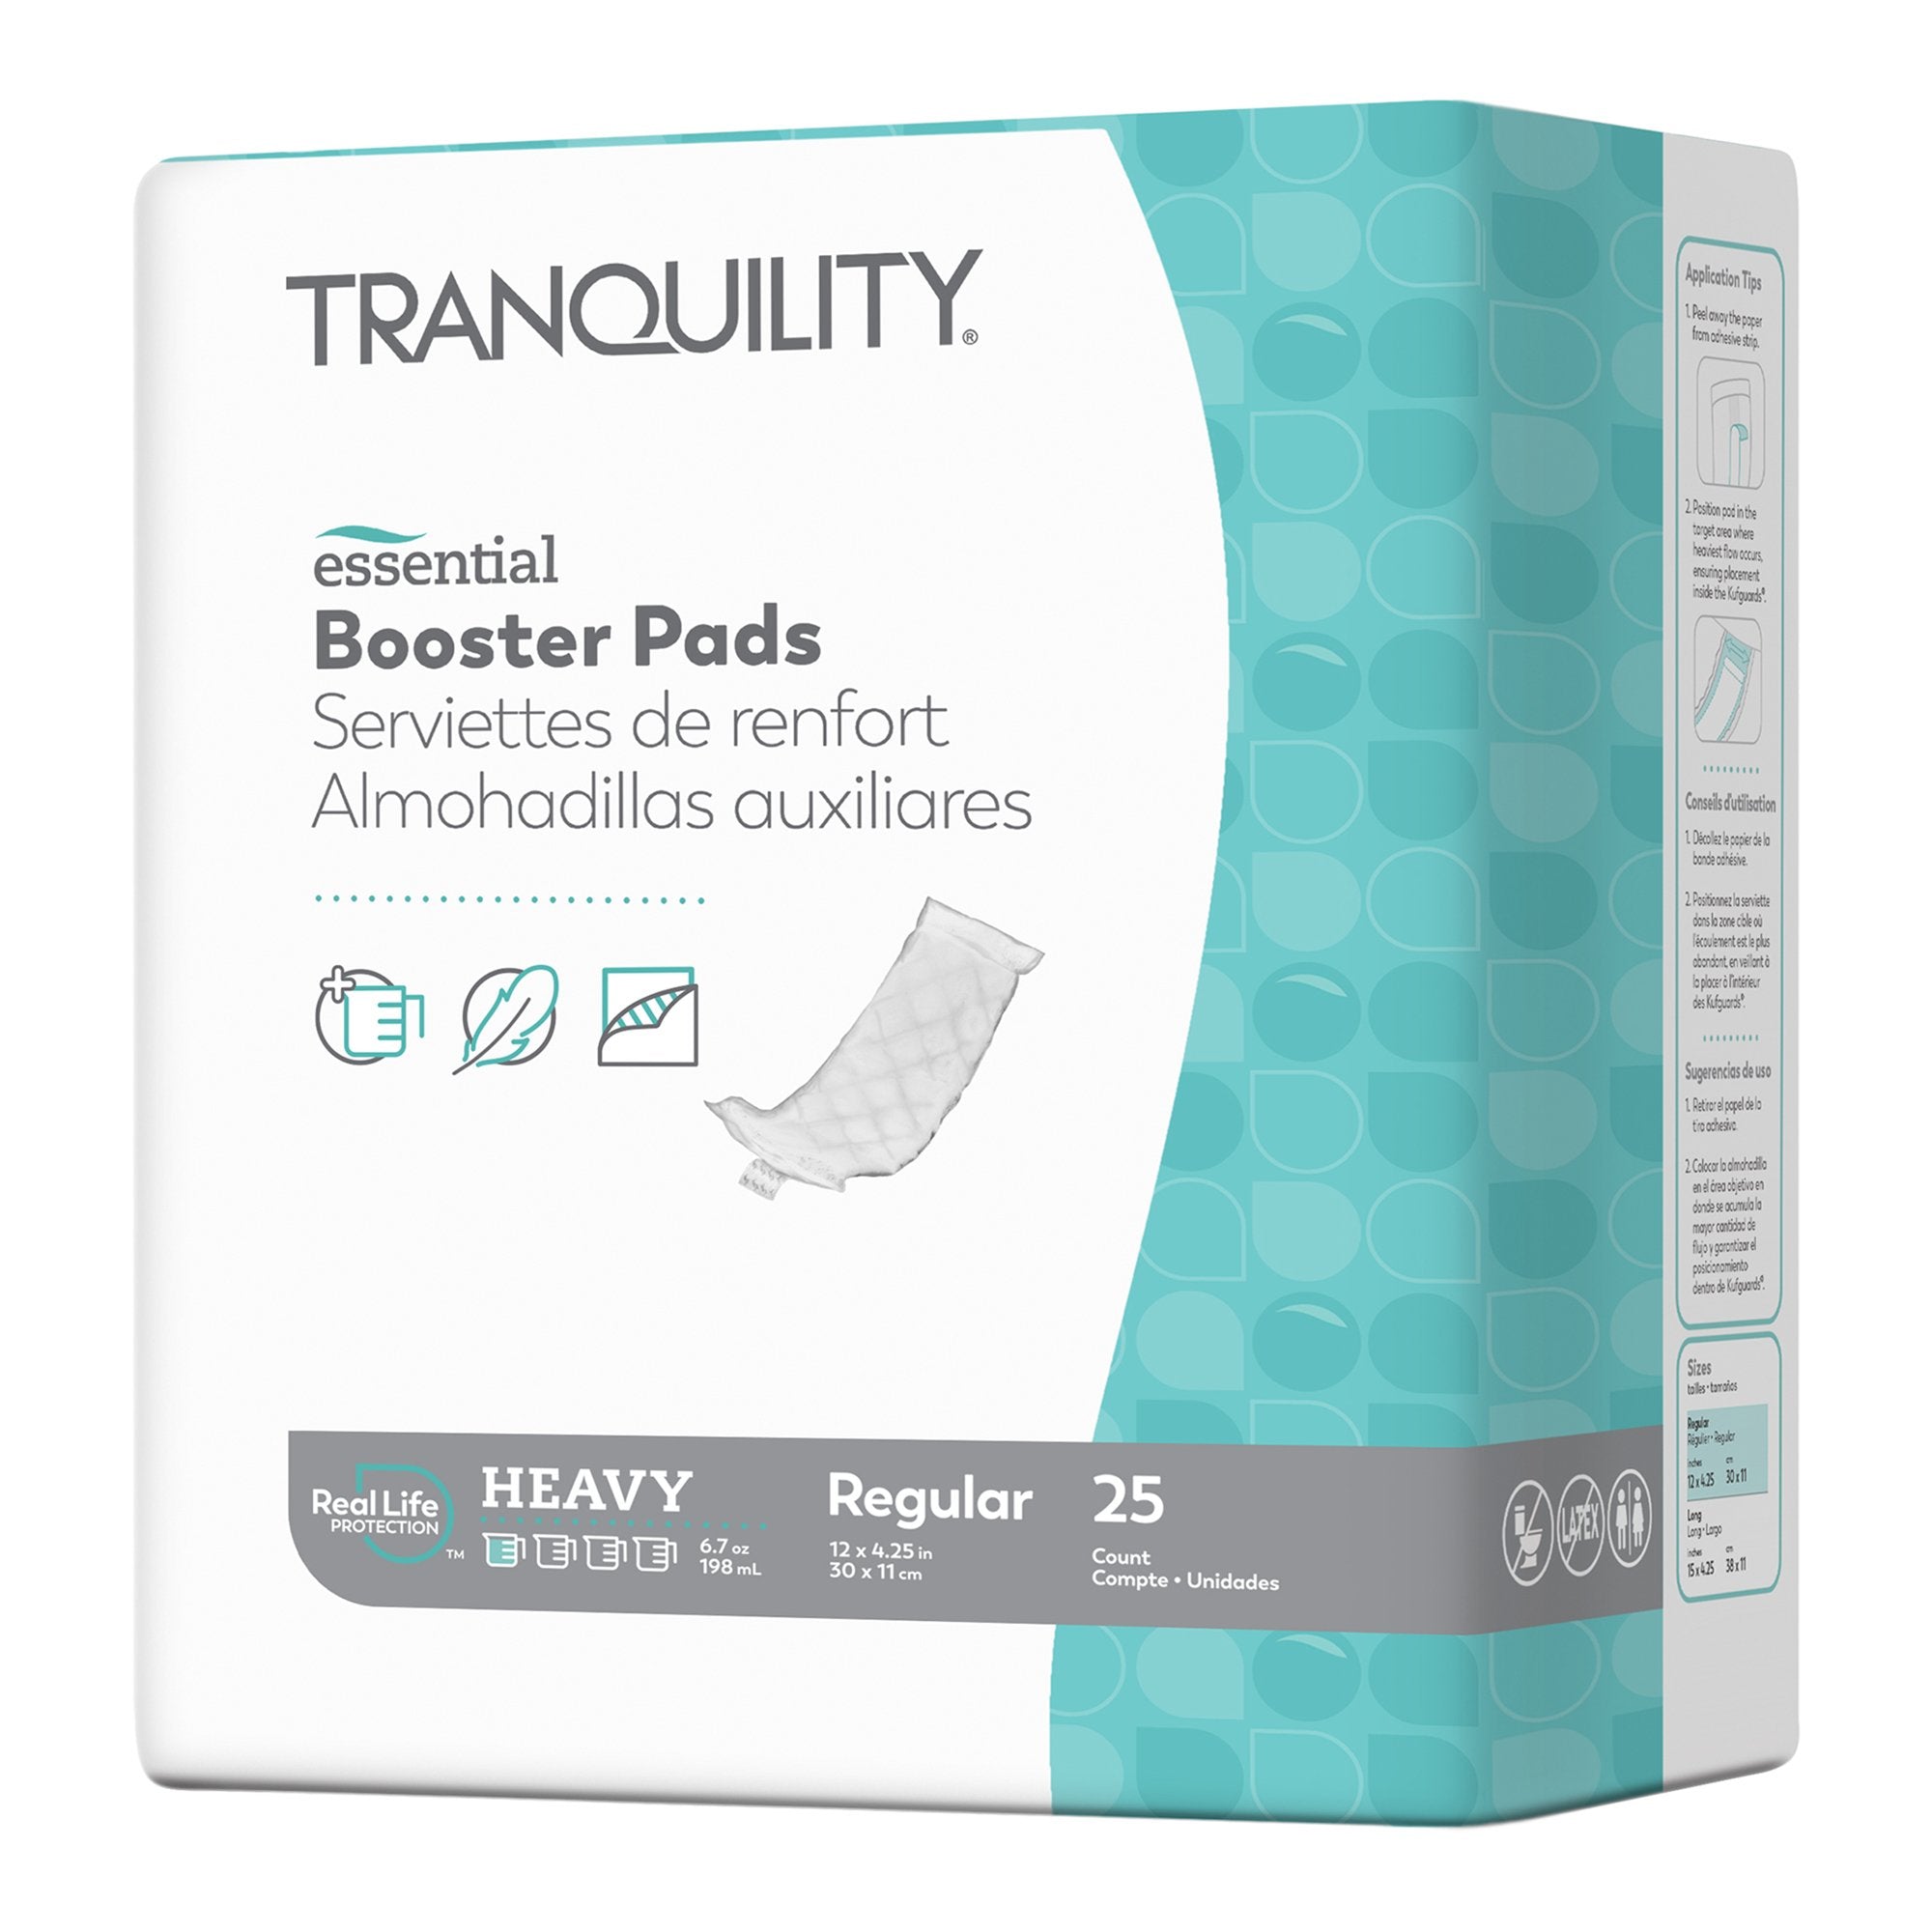 Booster Pad Tranquility® Essential 4-1/4 X 12 Inch Heavy Absorbency Superabsorbant Core Regular